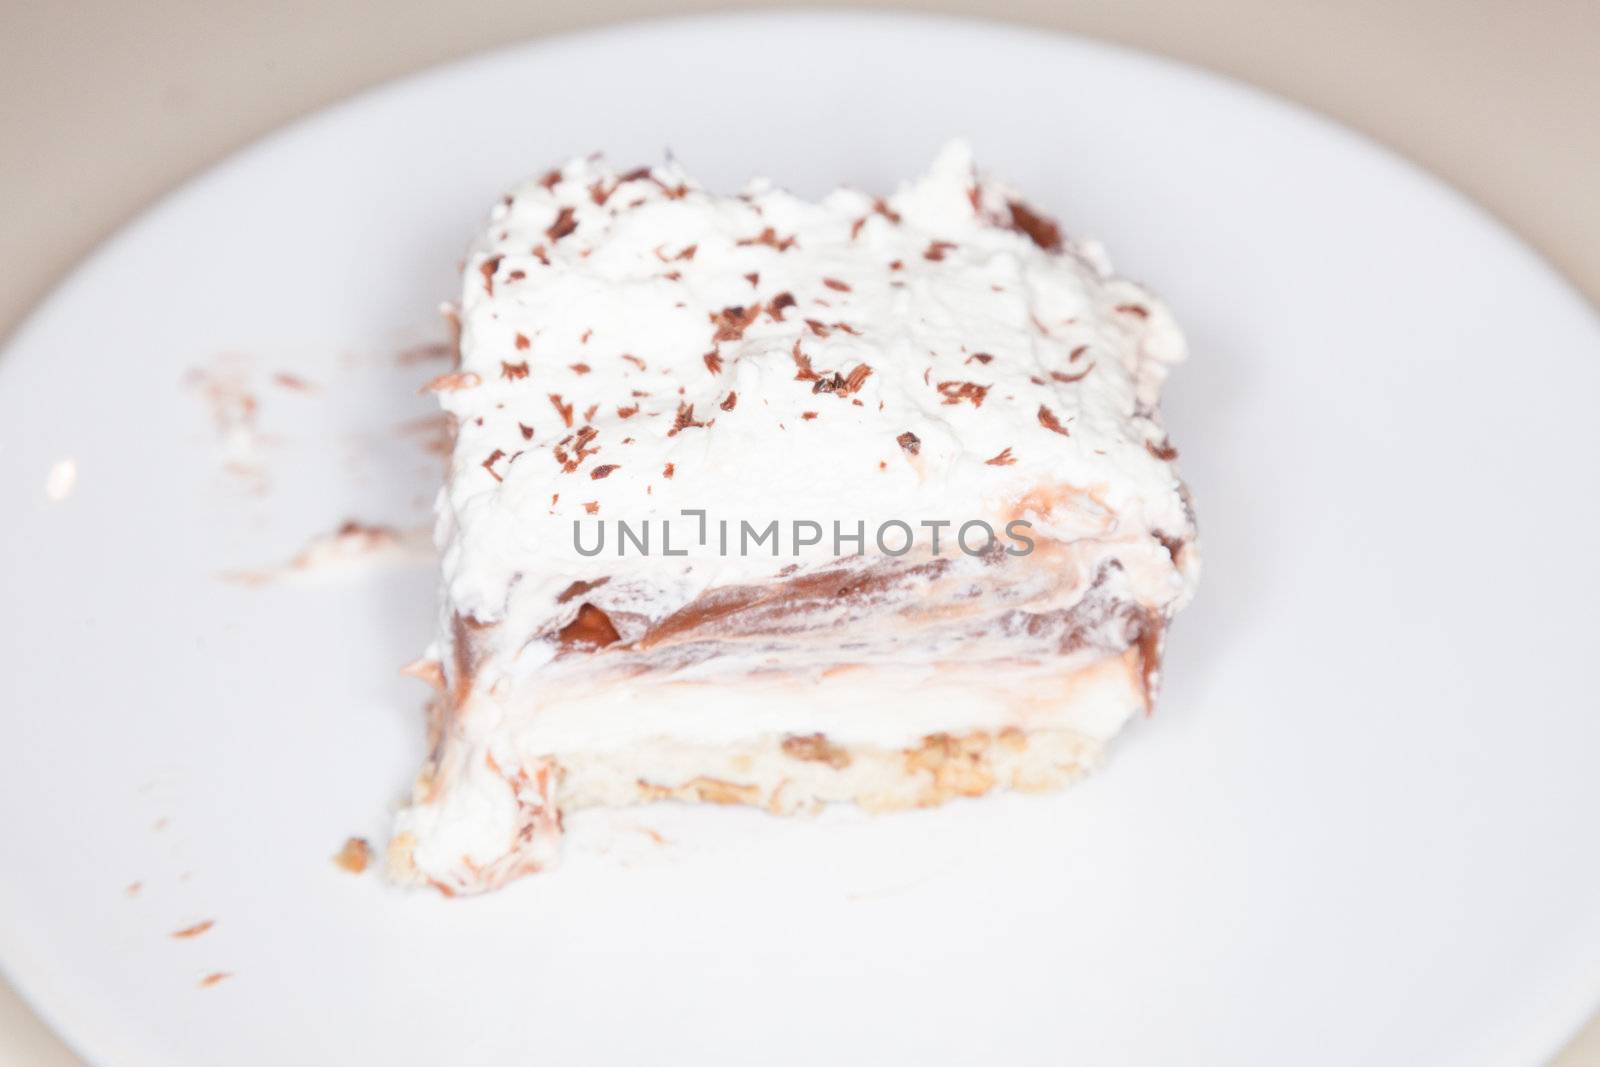 This is a creamy pudding-like pie. It has thick chocolate filling, thick cream cheese filling, a butter/nut crust, and is topped with whipped cream.